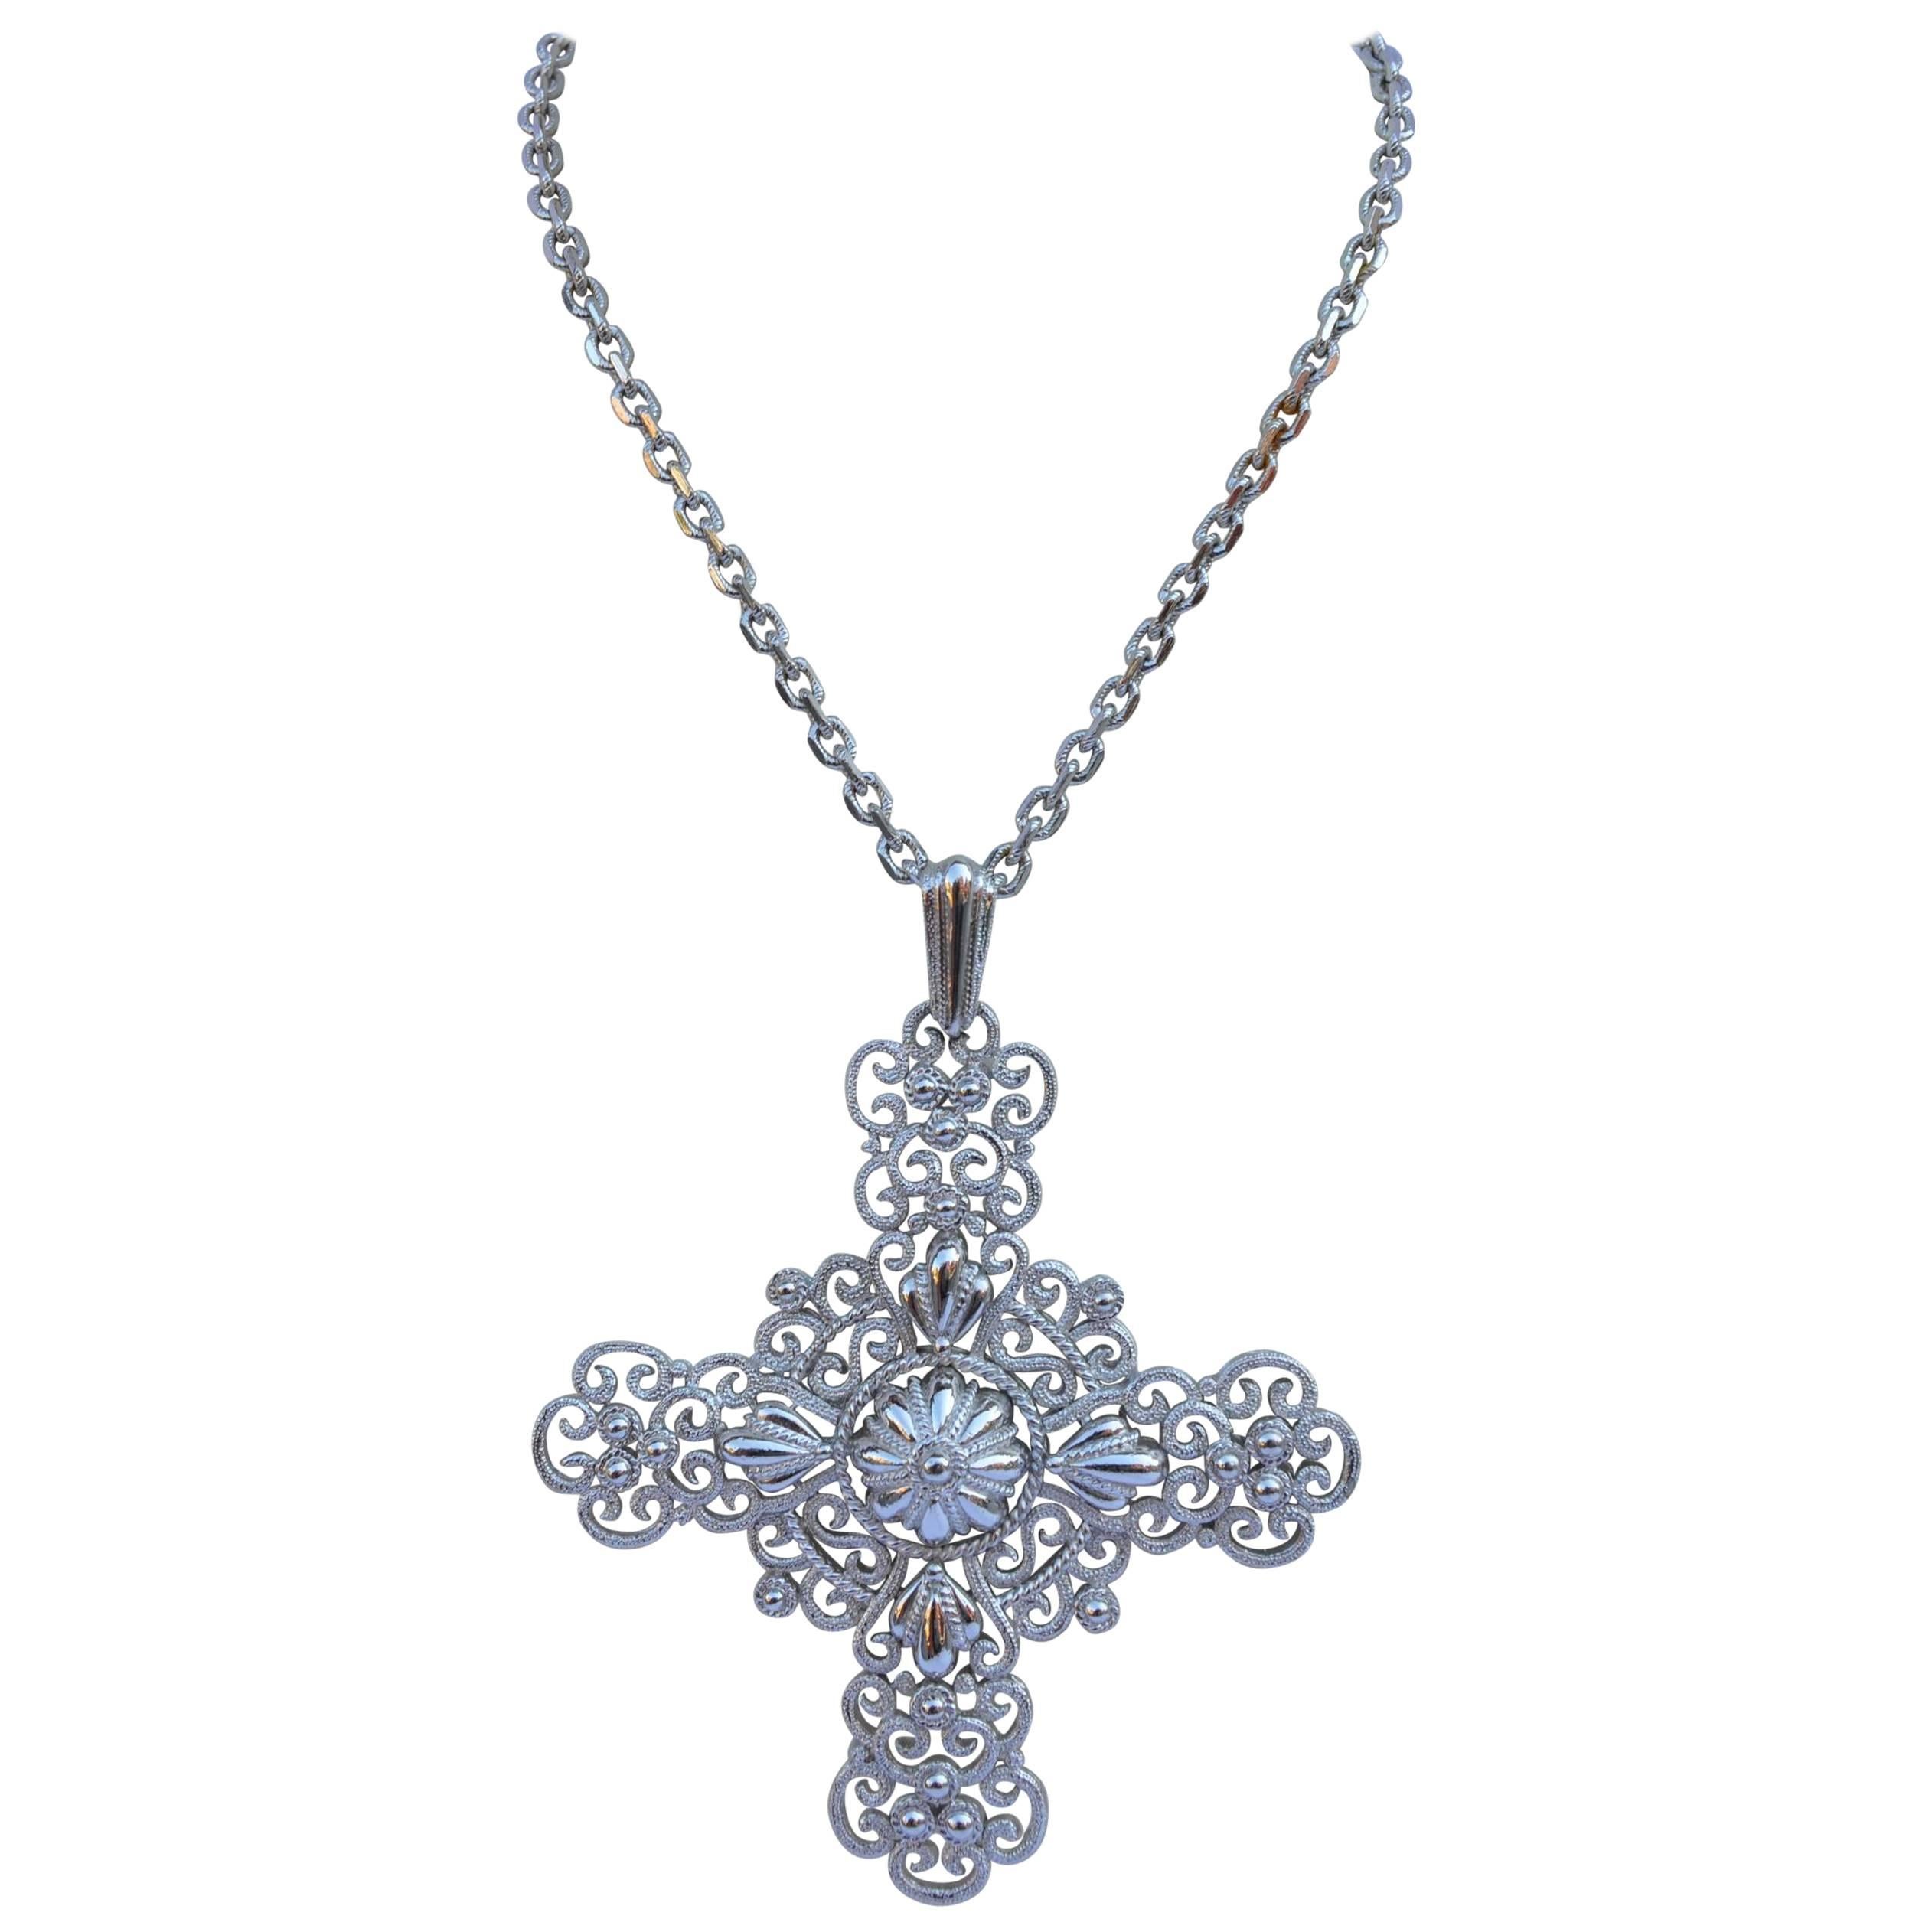 Trifari Polished Filigree Detailed Large Pendant and Necklace For Sale